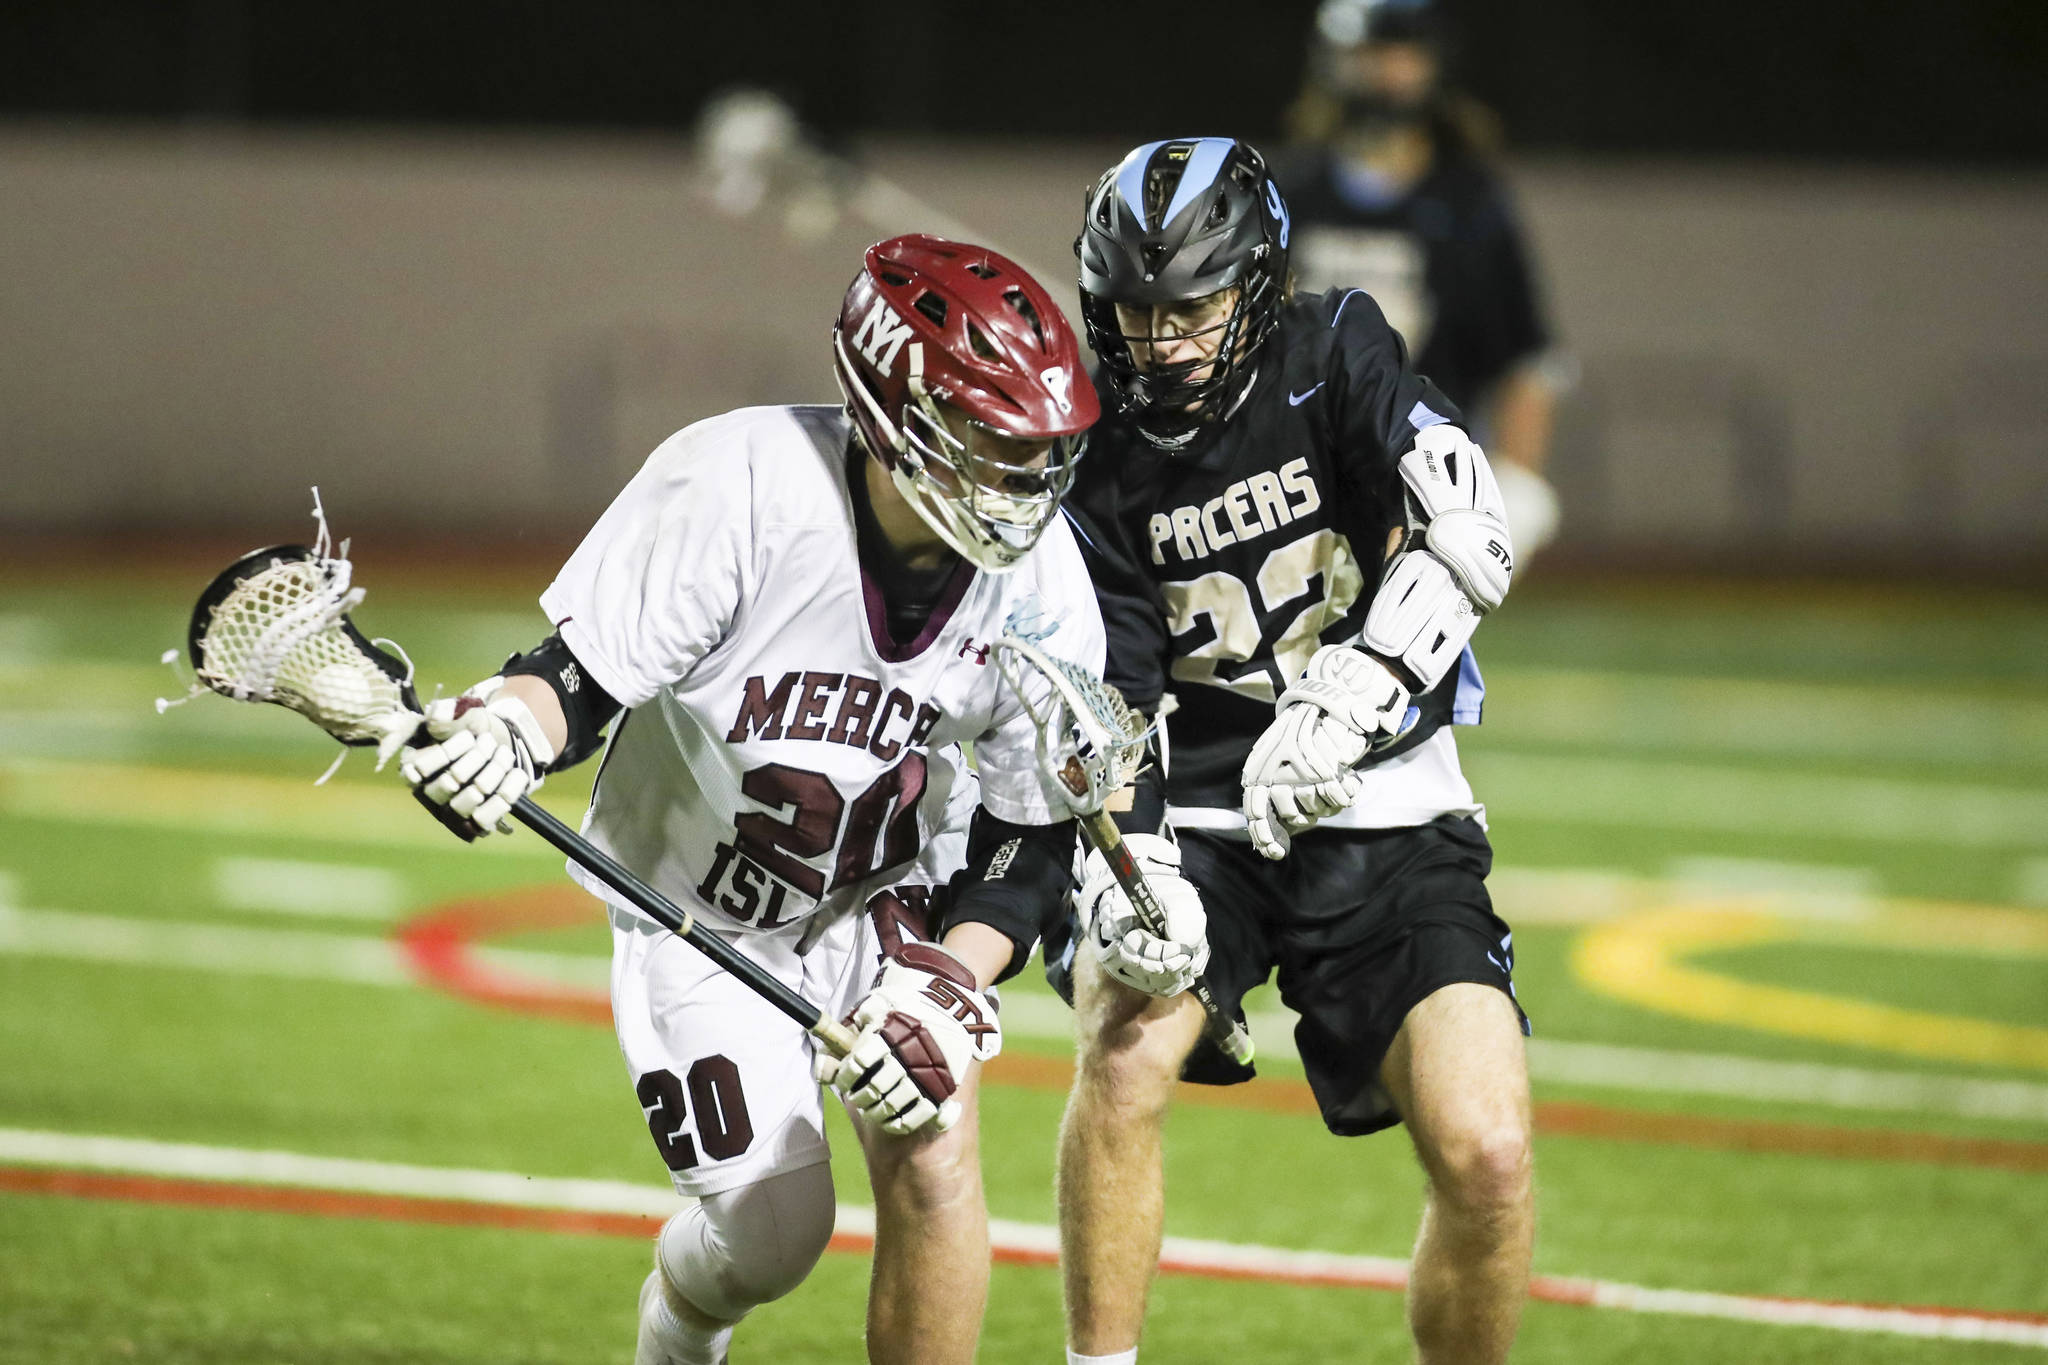 Photo courtesy of Rick Edelman/Rick Edelman Photography                                The Mercer Island Islanders boys lacrosse team earned their fifth win of the 2018 season courtesy of a 14-5 victory against Lakeridge on March 23. Mercer Island player Donnie Howard (pictured) controls the ball while being defended by a Lakeridge player.